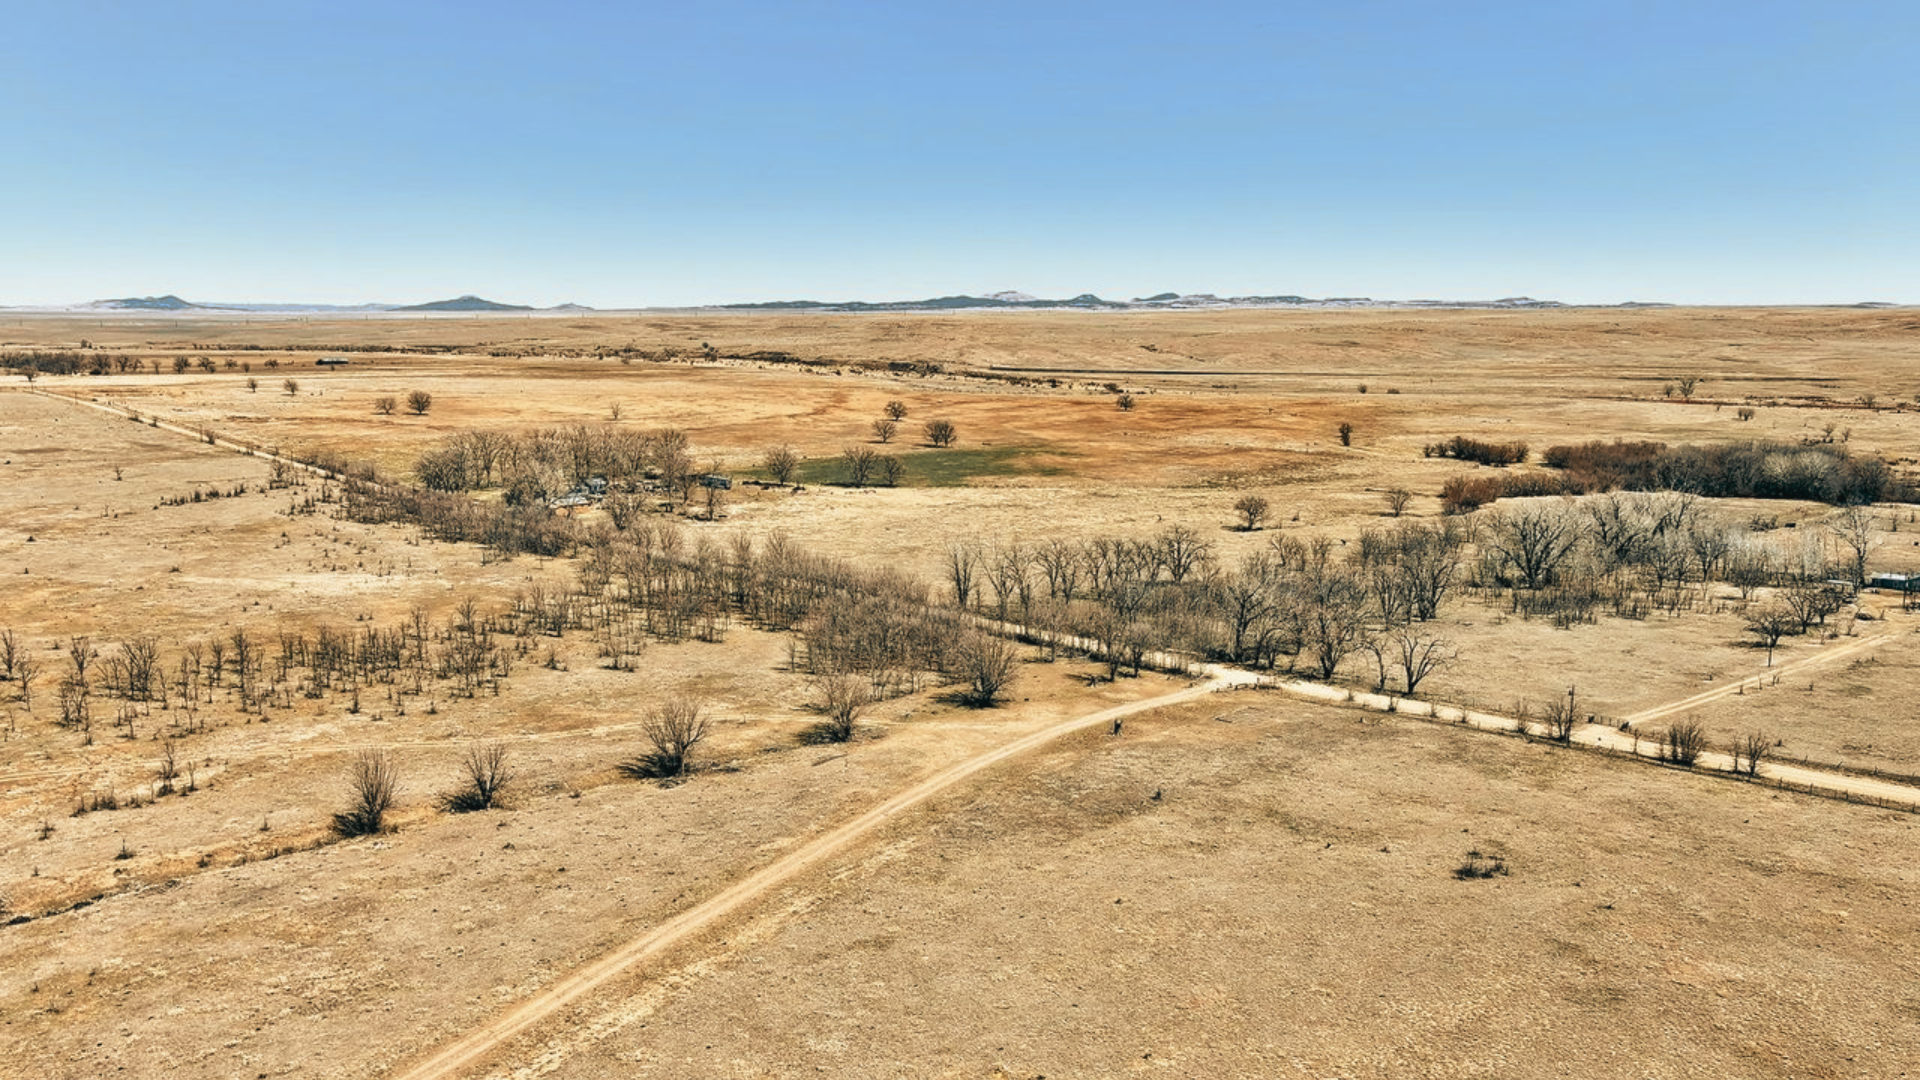 An aerial view of a desert landscape with trees and a dirt road.